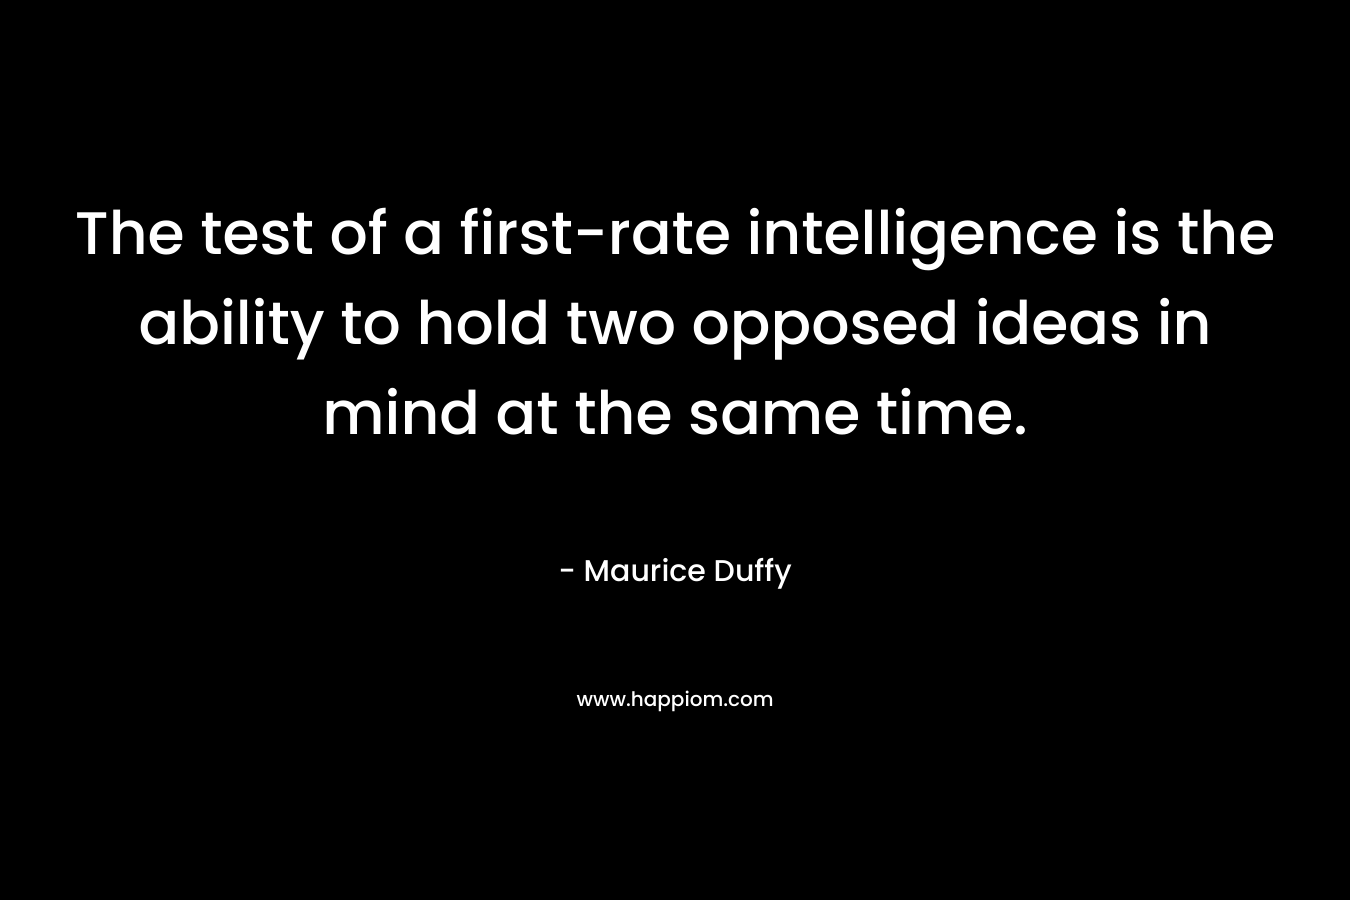 The test of a first-rate intelligence is the ability to hold two opposed ideas in mind at the same time. – Maurice Duffy